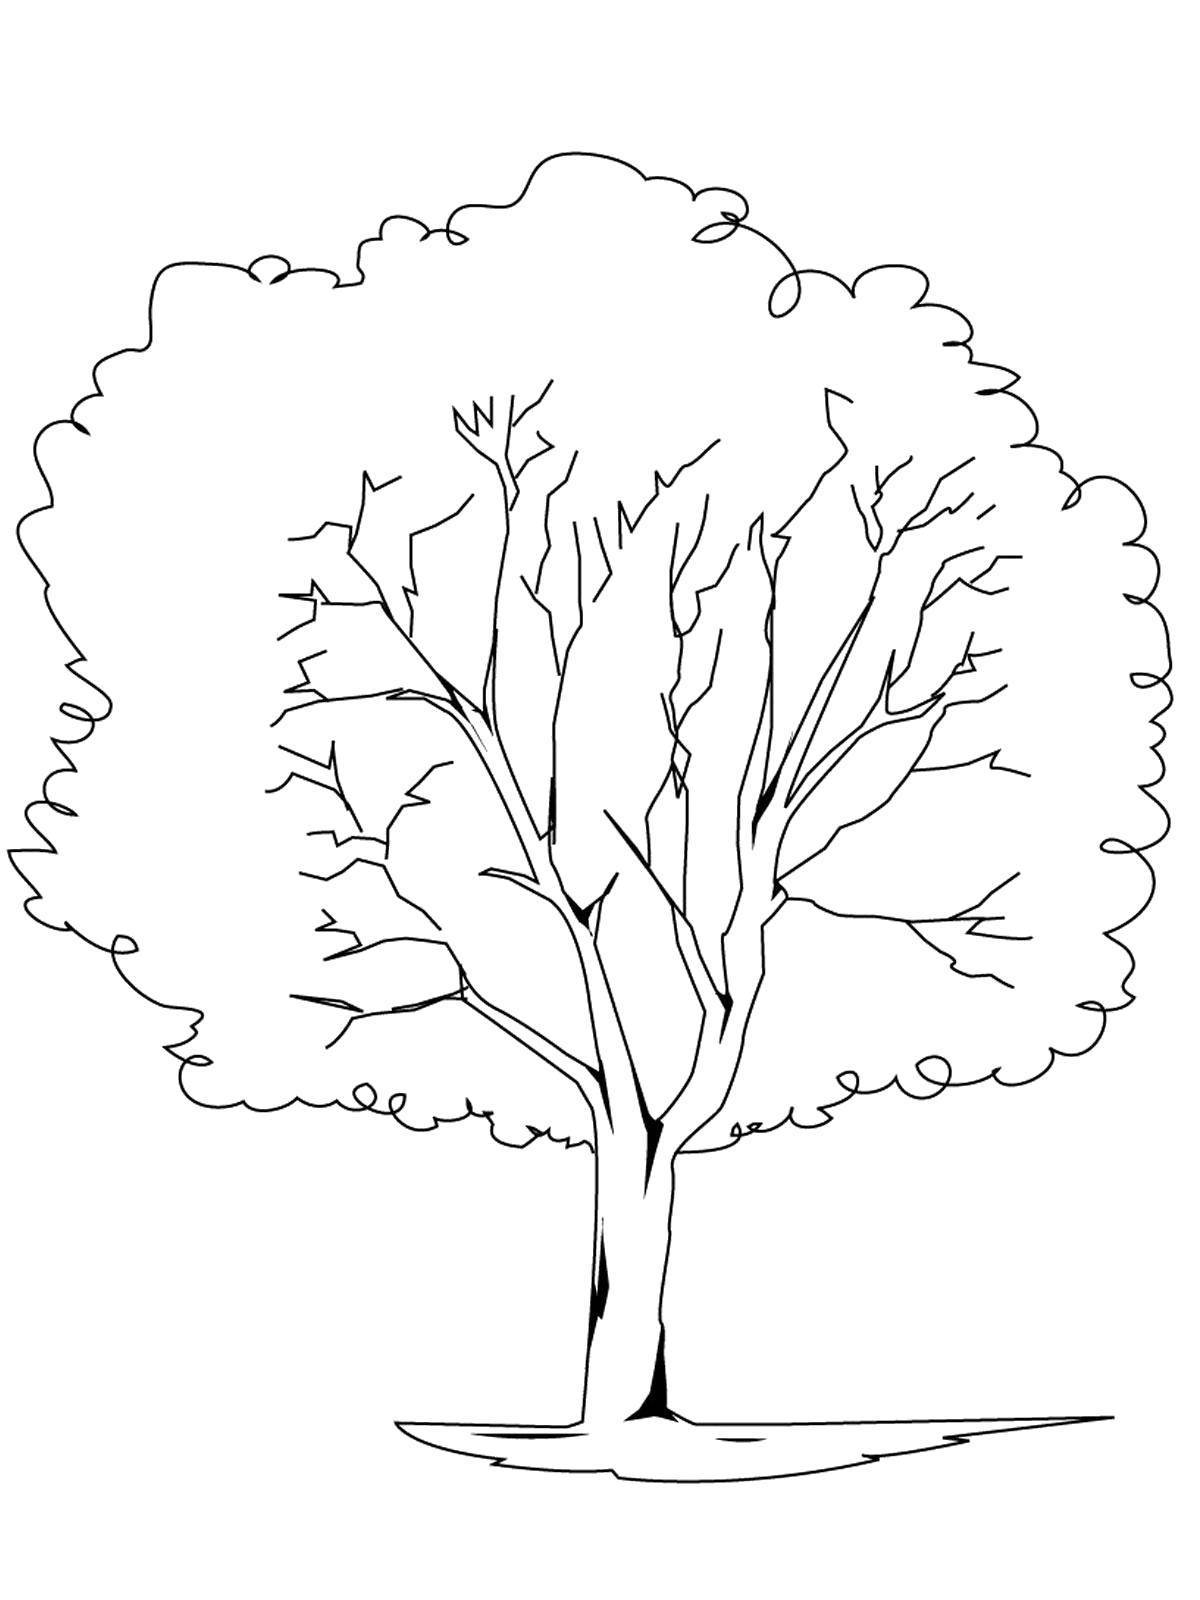 Amazing tree coloring page for kids